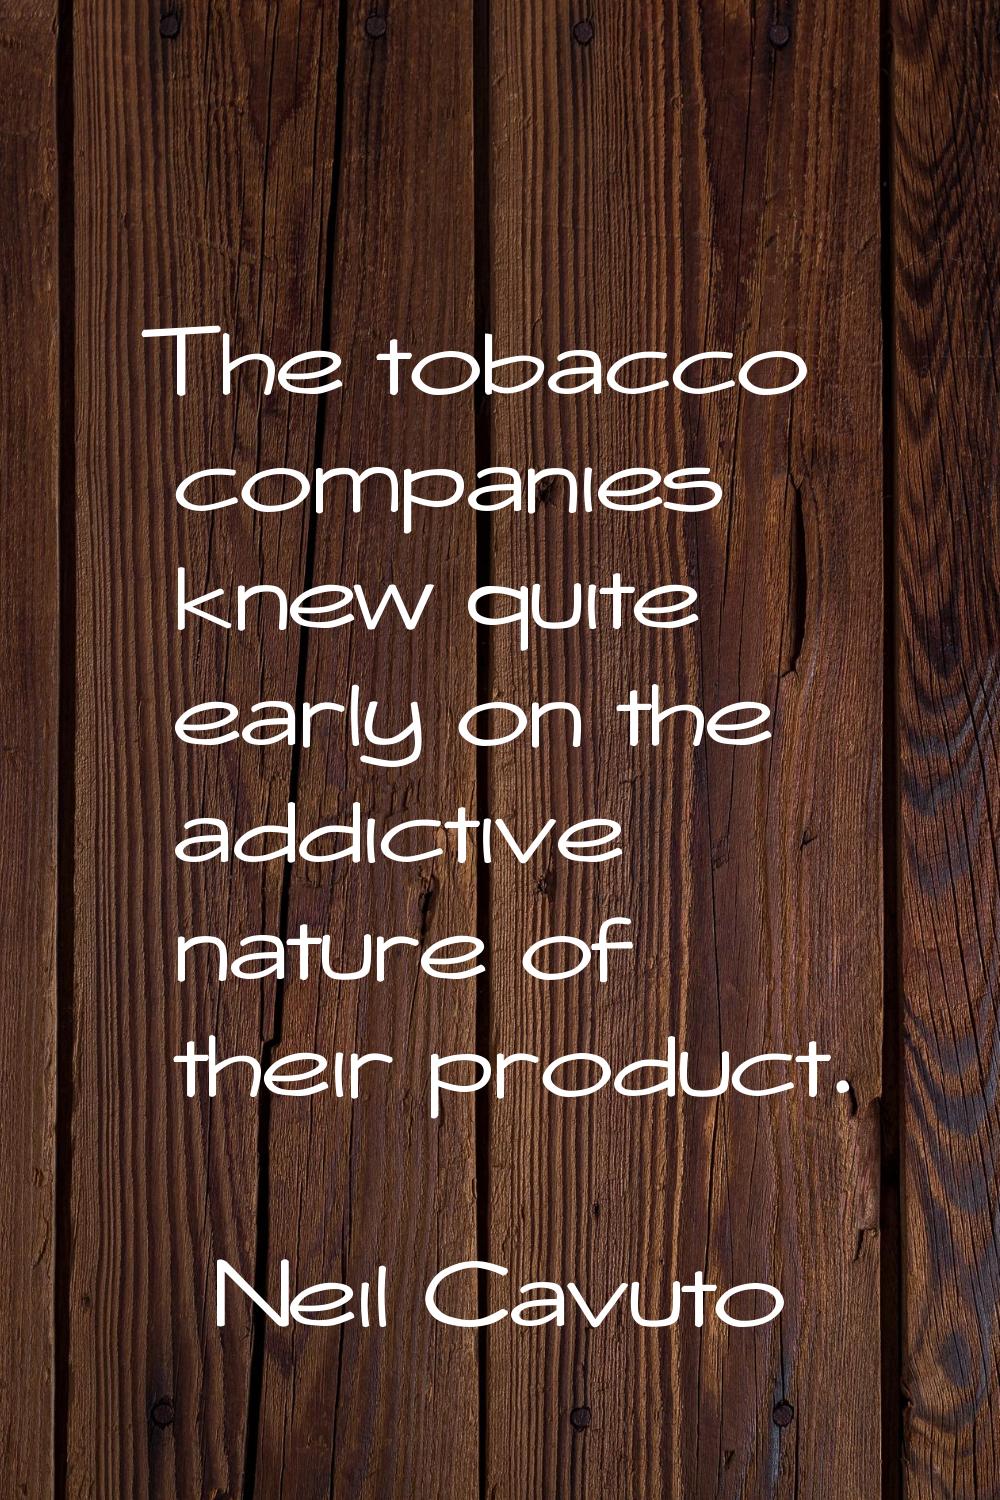 The tobacco companies knew quite early on the addictive nature of their product.